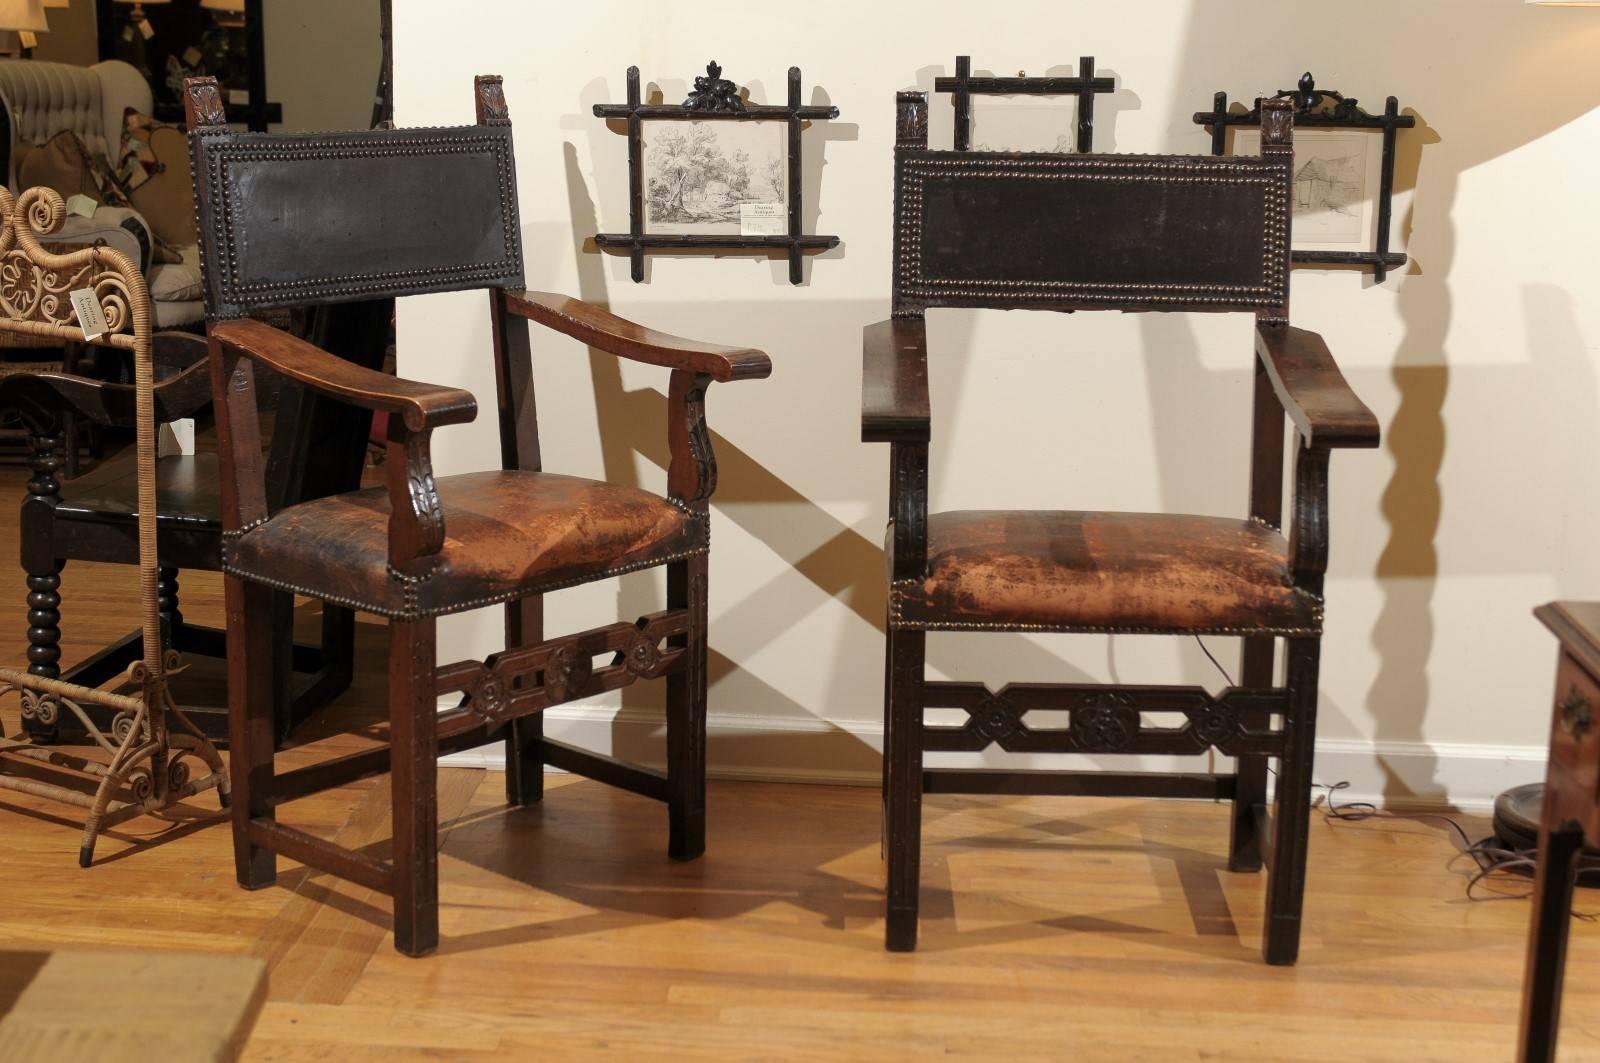 This pair of leather and wood chairs are Jacobean in style. 
The seats are leather and trimmed in nailheads. There are unique carvings on the legs, arms and backs.